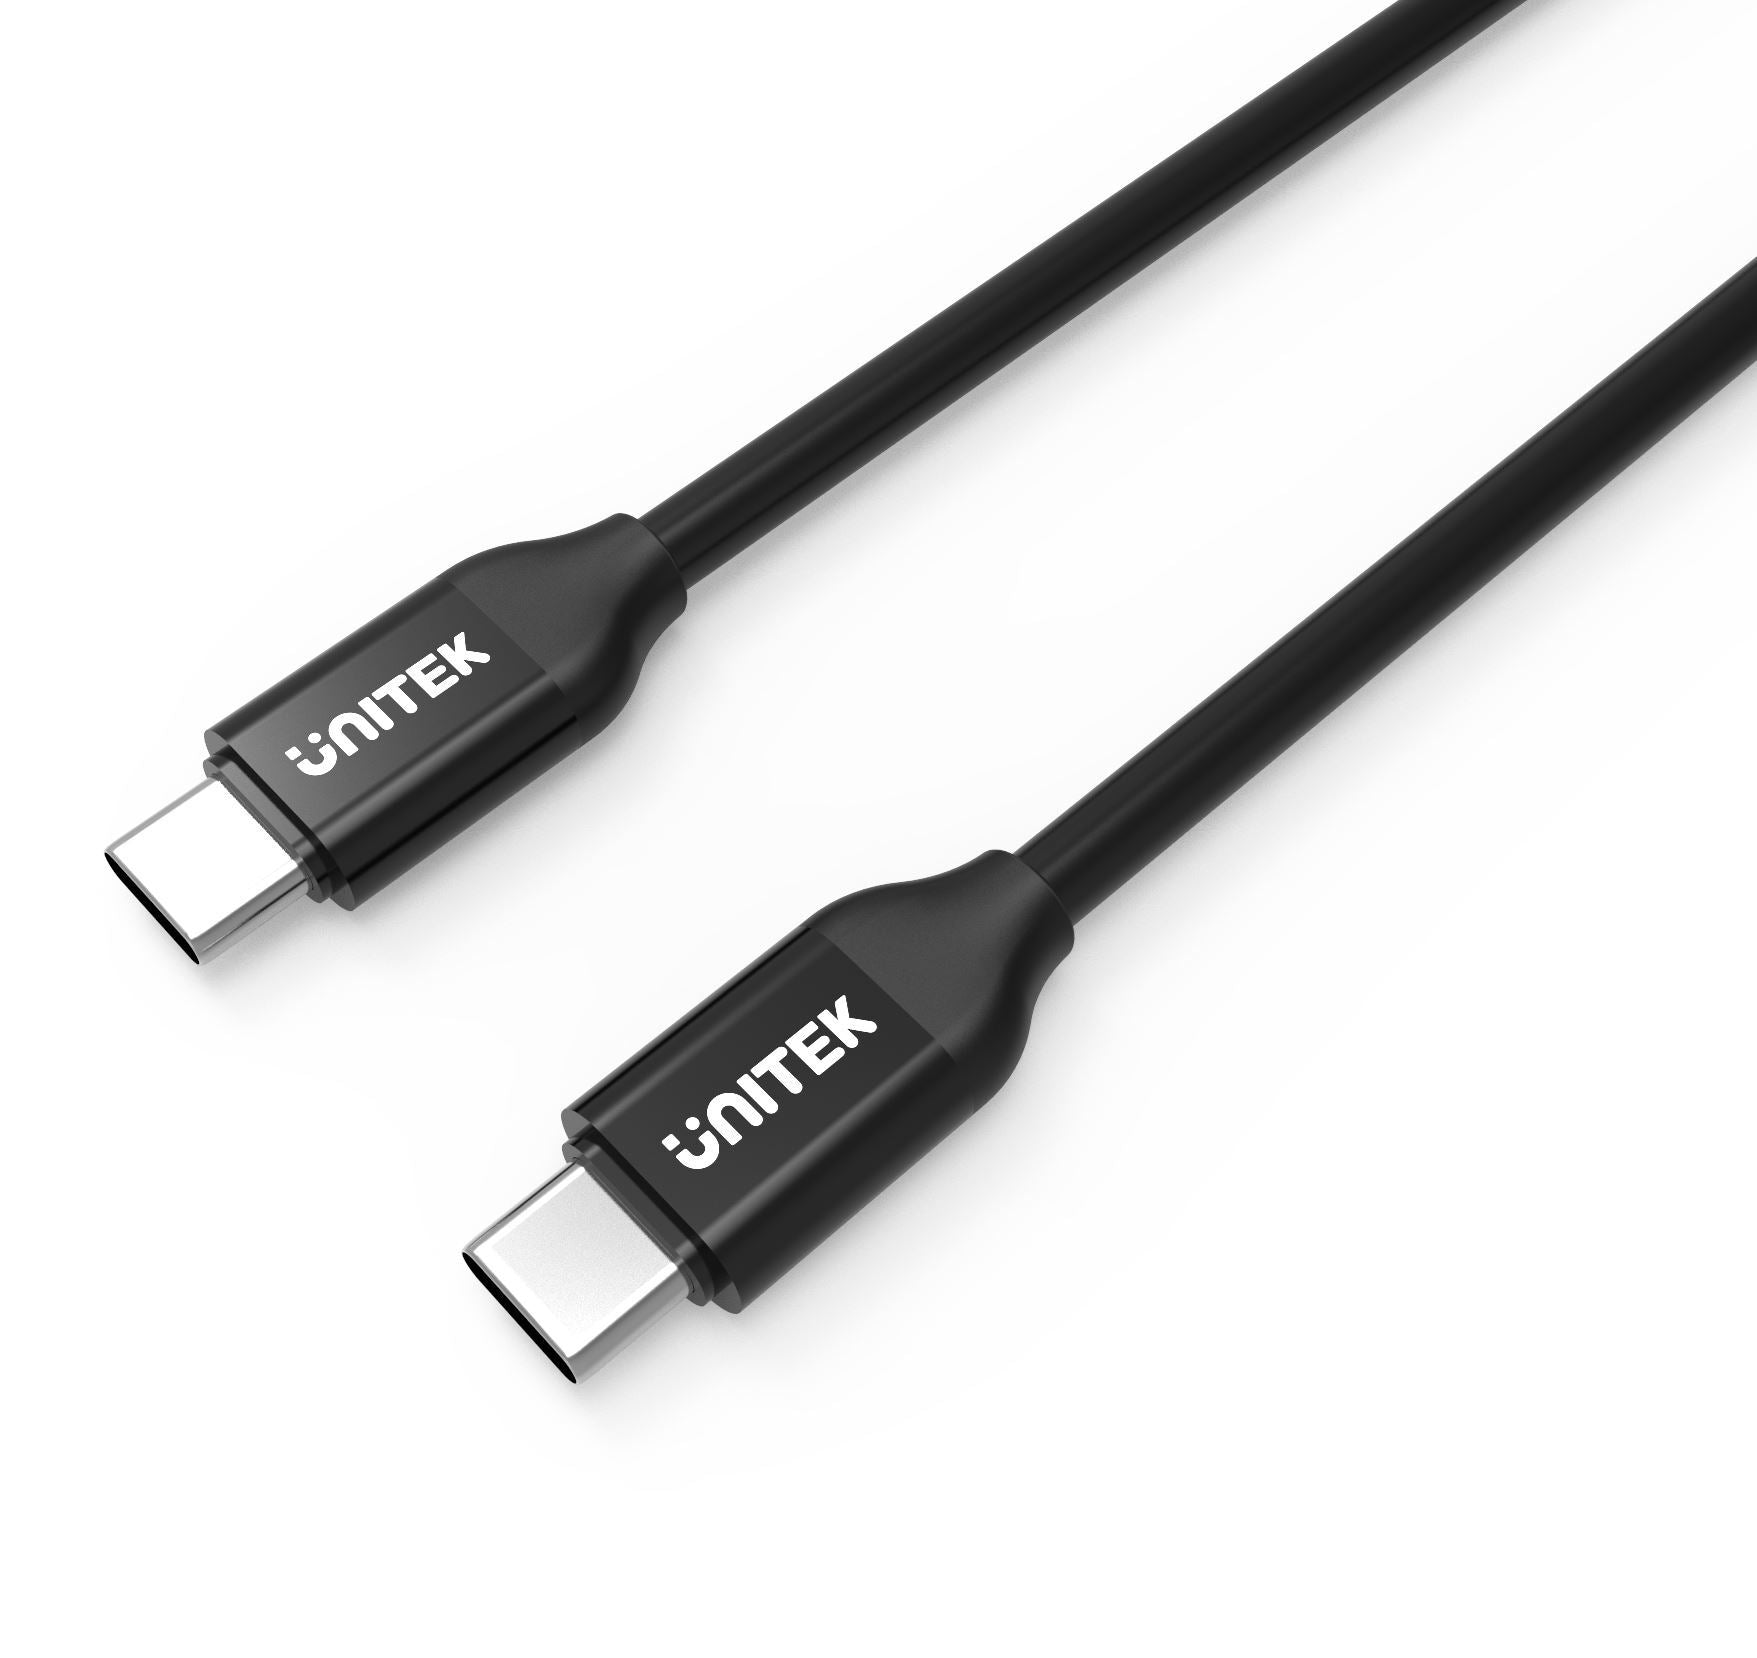 UNITEK_2m_USB-C_to_USB-C_Cable._For_Syncing_&_Charging,_Supports_up_to_100W_USB_Power_Delivery._An_Integrated_E-MARK_Chip_Boosts_the_Power_up_to_20V/5A._USB-C_Reversible_Connector._Black_Colour 273